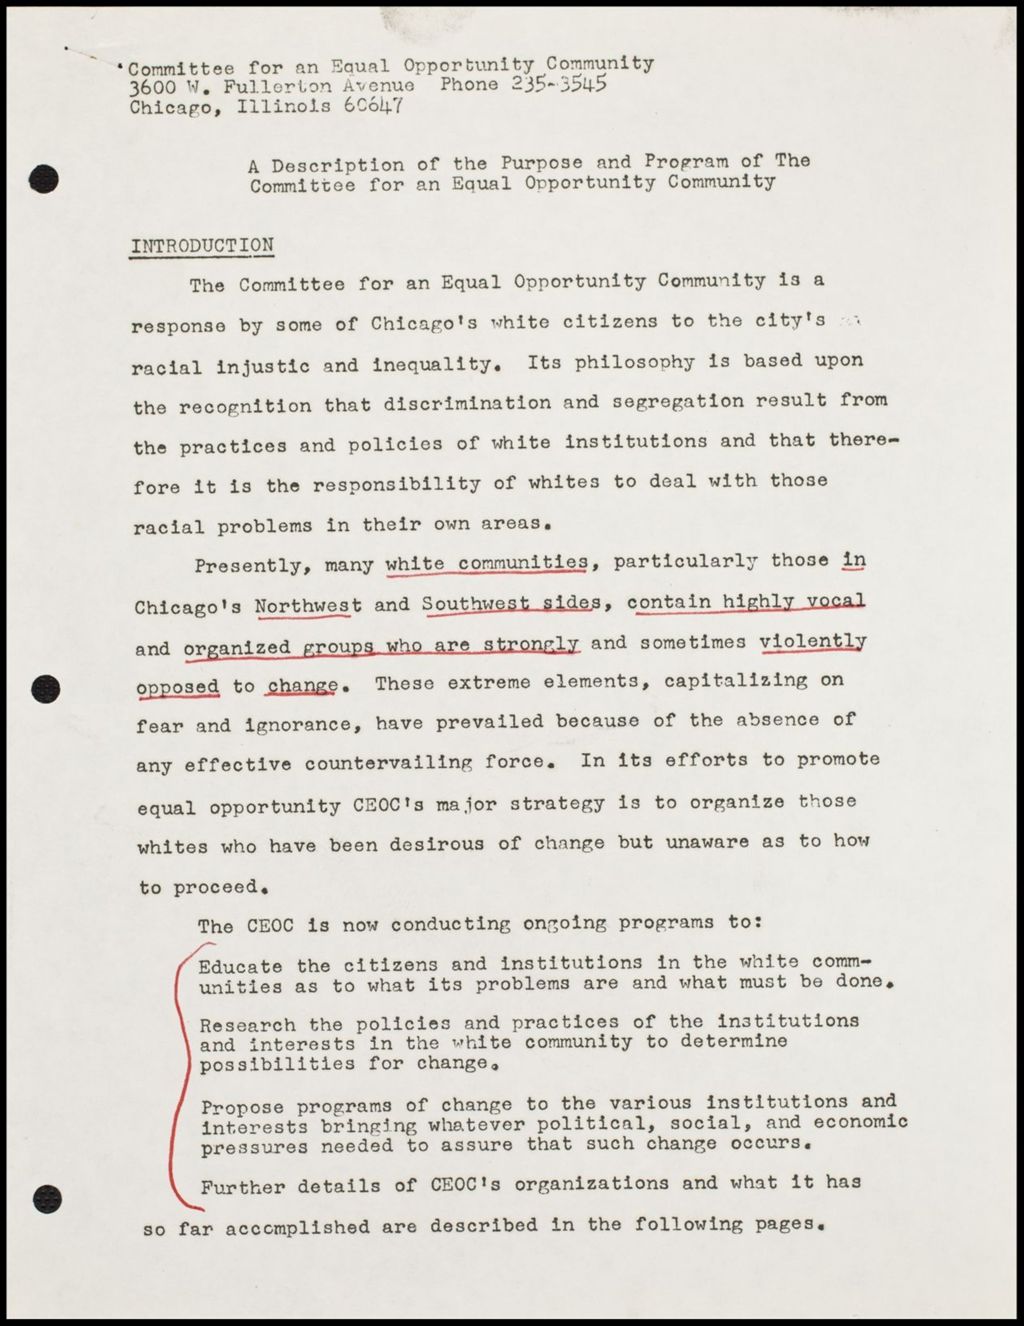 Committee for an Equal Opportunity Community, 1968-1969 (Folder IV-1125)